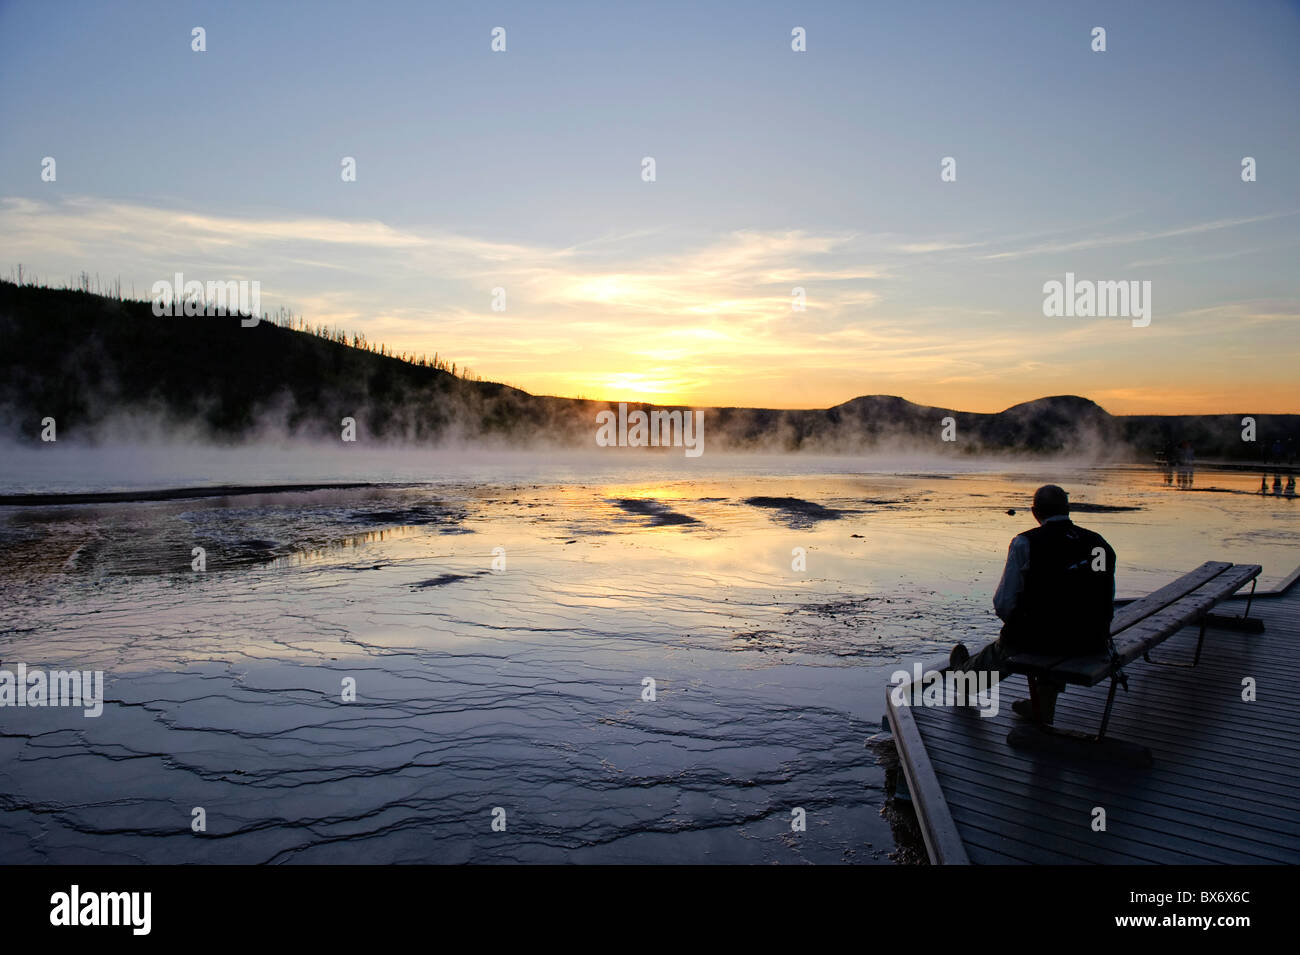 Grand Prismatic Spring, Yellowstone National Park, Wyoming, USA Banque D'Images